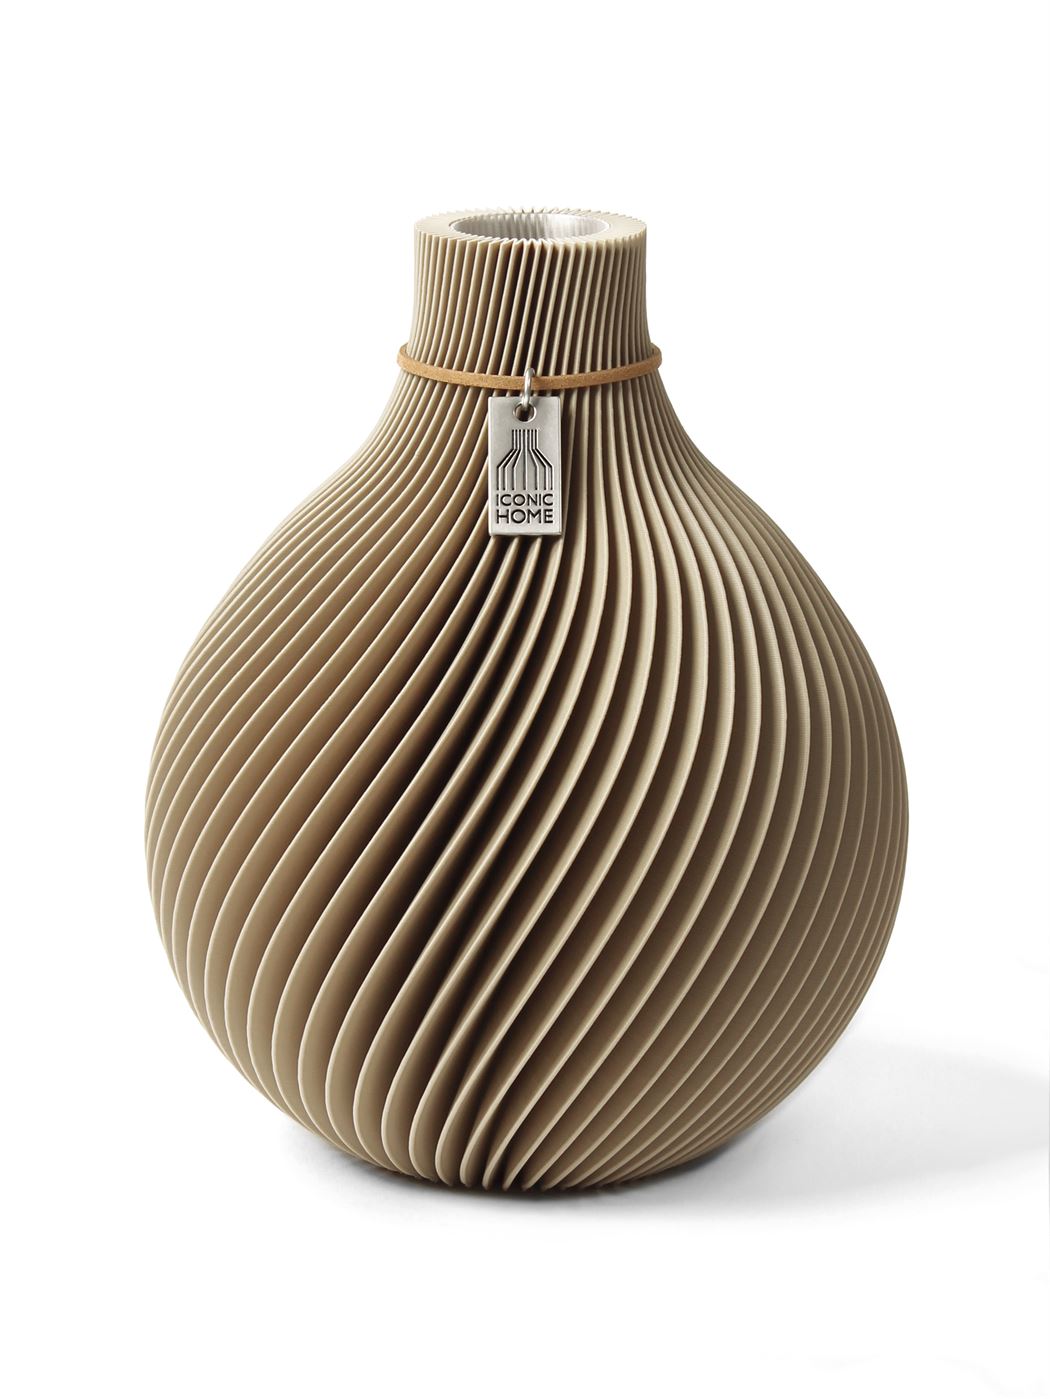 Vase Sphere Natural Oak Small ICONIC HOME